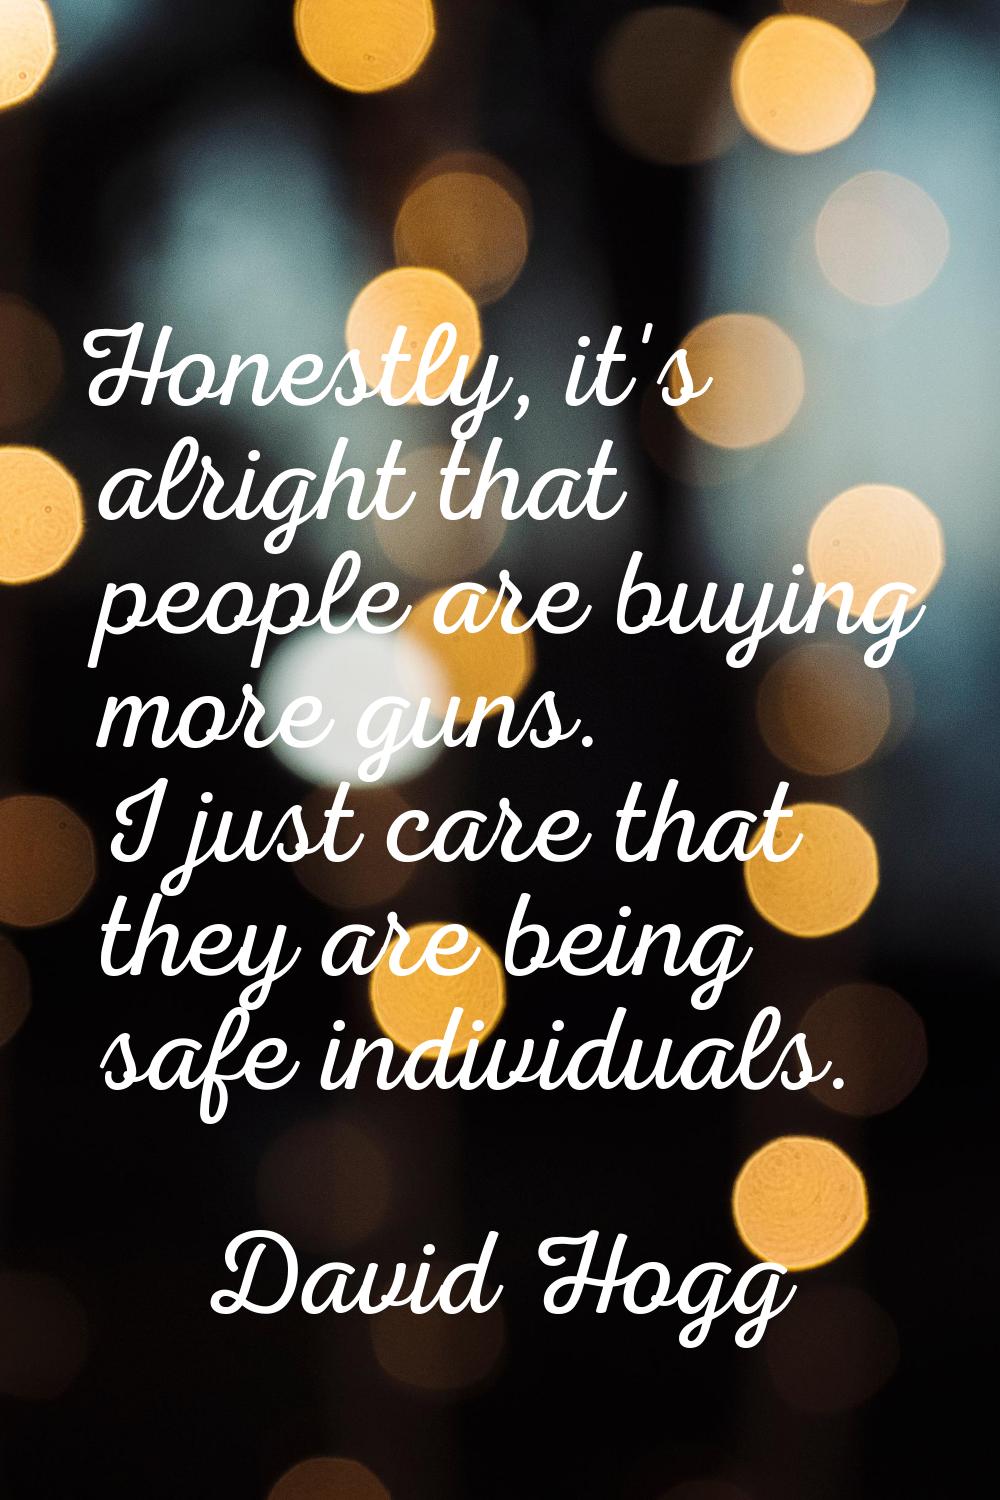 Honestly, it's alright that people are buying more guns. I just care that they are being safe indiv